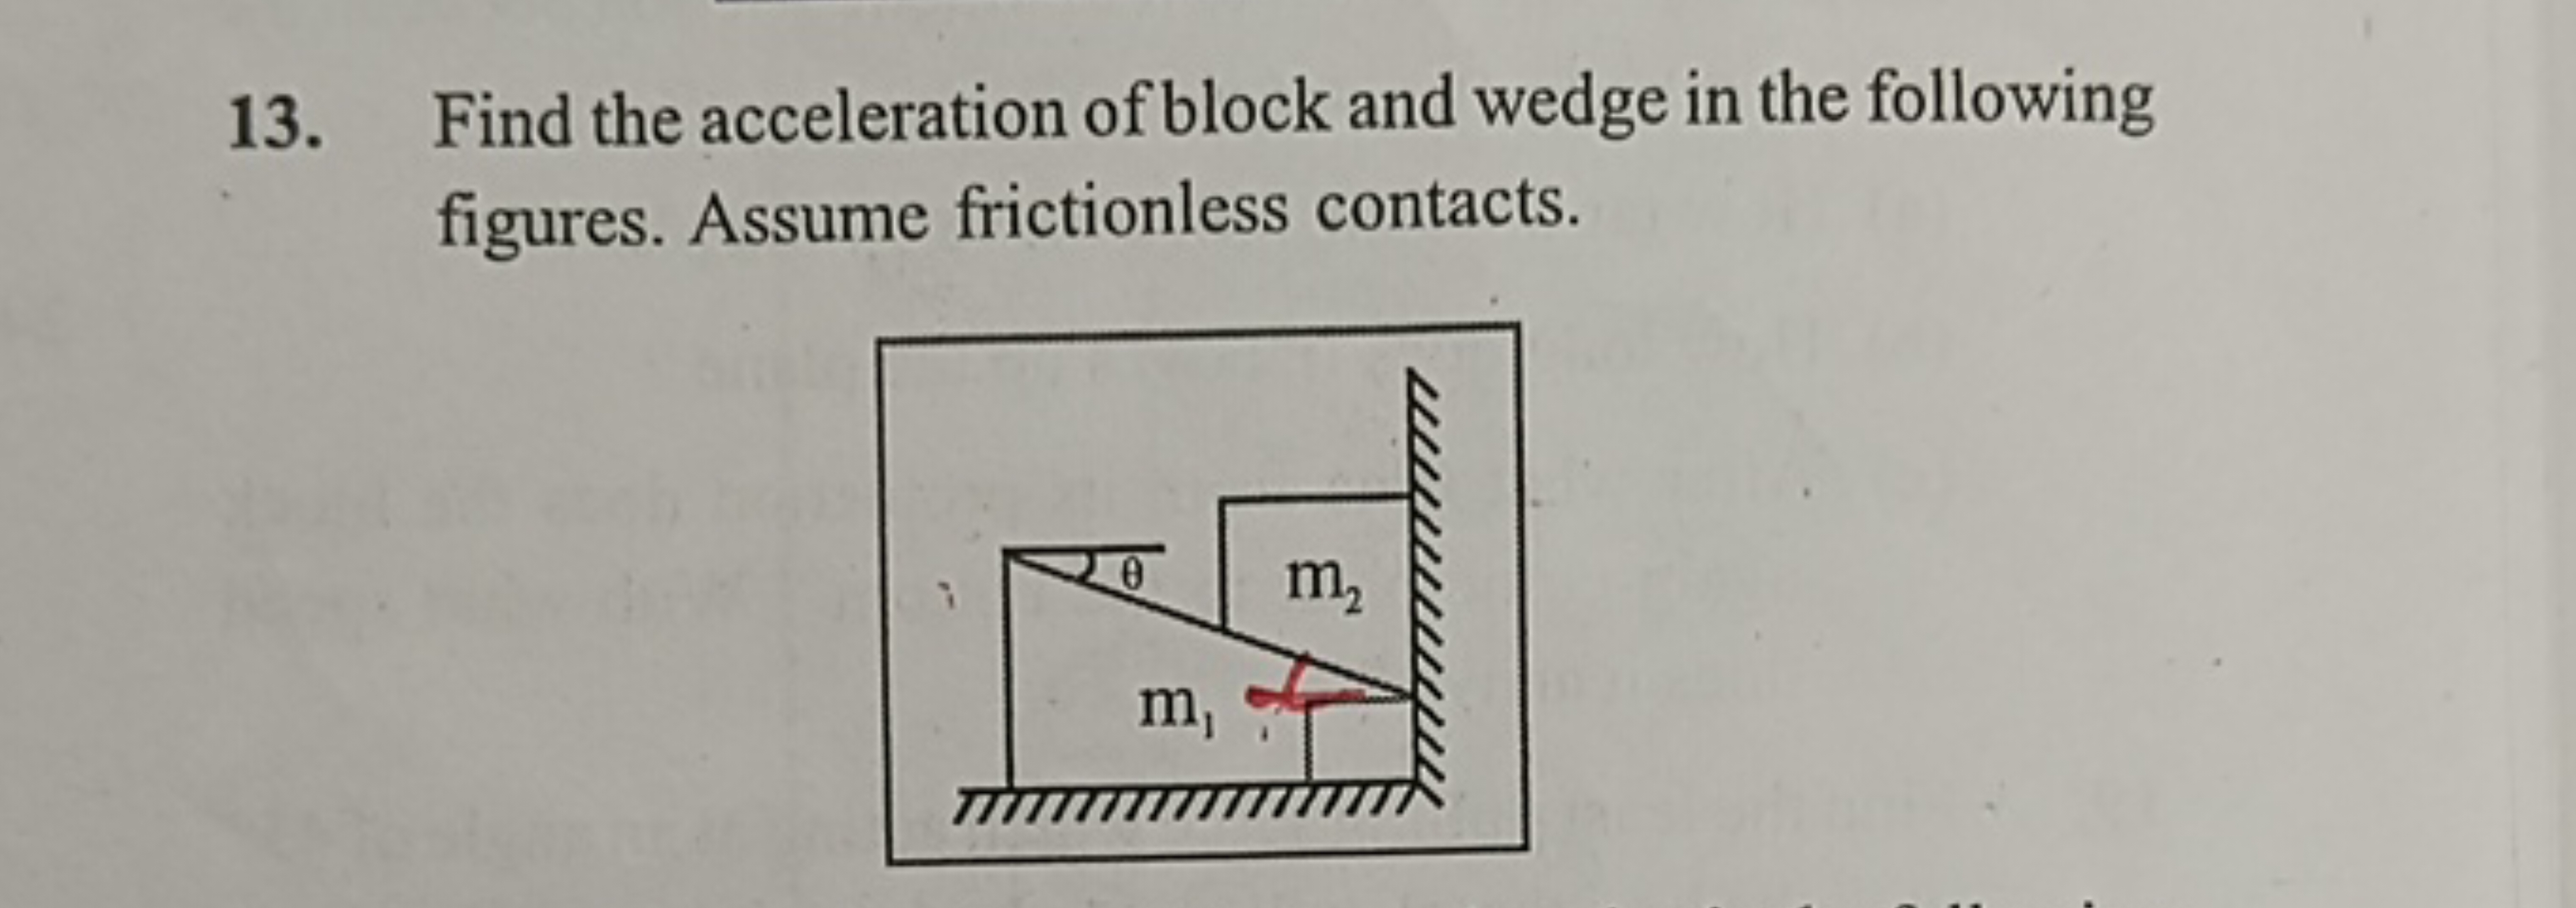 13. Find the acceleration of block and wedge in the following figures.